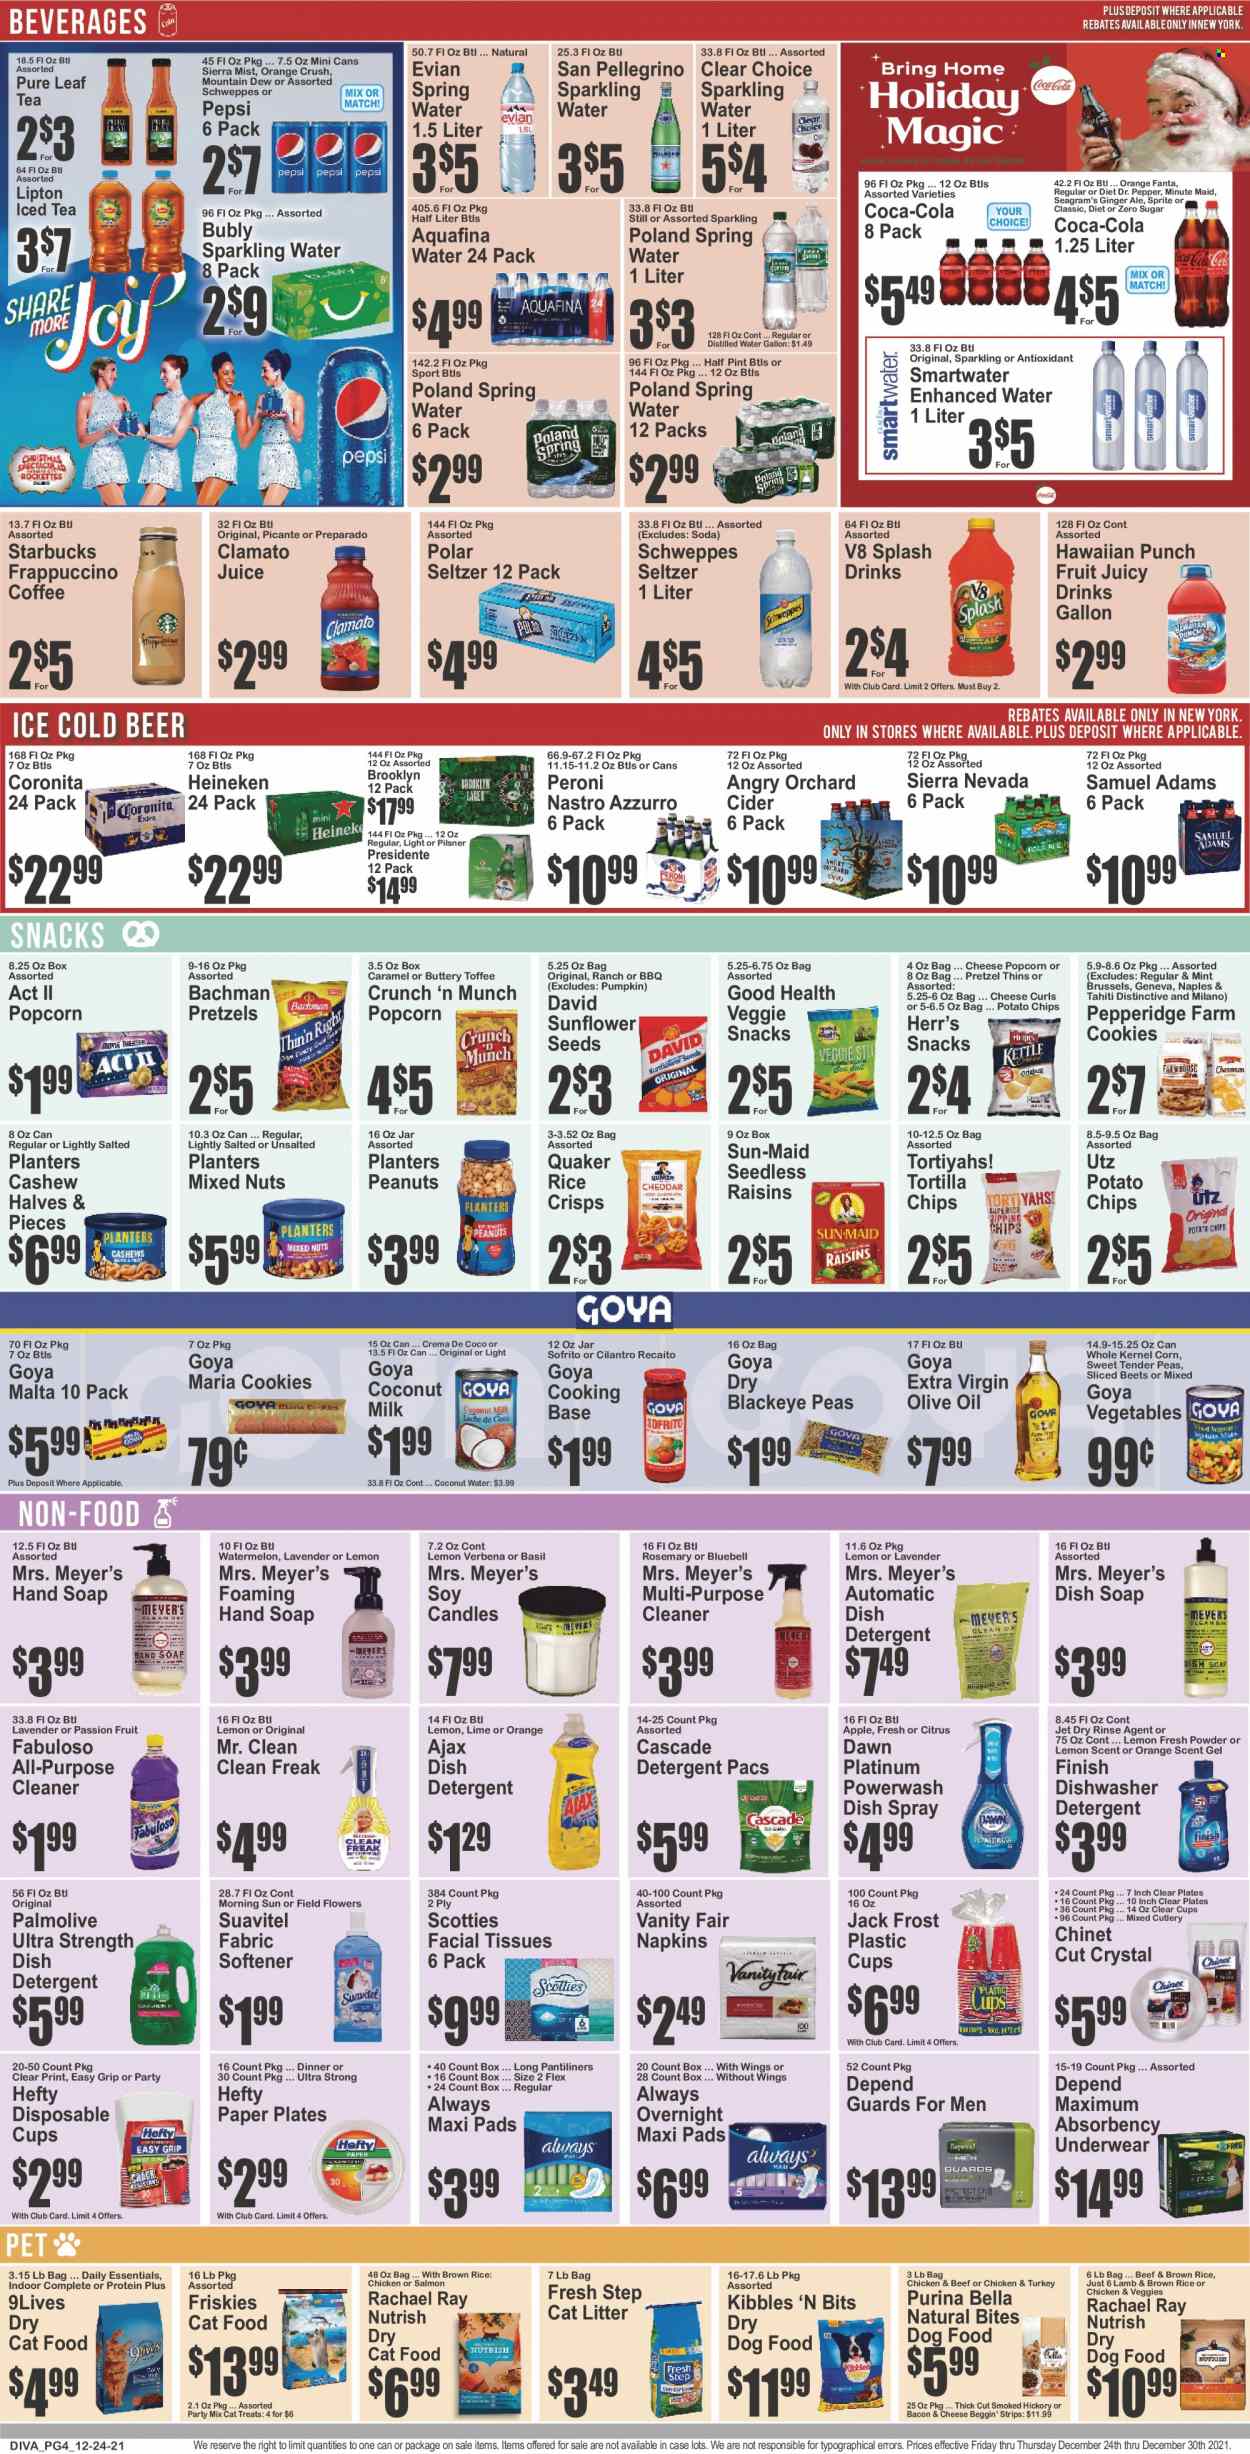 thumbnail - Key Food Flyer - 12/24/2021 - 12/30/2021 - Sales products - pretzels, corn, pumpkin, watermelon, oranges, Quaker, bacon, strips, cookies, snack, toffee, tortilla chips, potato chips, chips, Thins, popcorn, rice crisps, coconut milk, Goya, esponja, cilantro, rosemary, extra virgin olive oil, olive oil, oil, raisins, peanuts, dried fruit, sunflower seeds, mixed nuts, Planters, Coca-Cola, ginger ale, Mountain Dew, Schweppes, Sprite, Pepsi, juice, Fanta, Lipton, ice tea, Dr. Pepper, Clamato, coconut water, Sierra Mist, fruit punch, Aquafina, seltzer water, spring water, soda, sparkling water, Smartwater, Evian, San Pellegrino, Pure Leaf, coffee, Starbucks, frappuccino, cider, beer, Heineken, Peroni, napkins, tissues, detergent, cleaner, Ajax, Fabuloso, Cascade, fabric softener, Jet, hand soap, Palmolive, soap, pantiliners, sanitary pads, facial tissues, Hefty, plate, cup, candle, paper plate, cat litter, animal food, cat food, dog food, Purina, 9lives, dry dog food, dry cat food, Beggin', Friskies, Fresh Step, Purina Bella, Nutrish. Page 4.